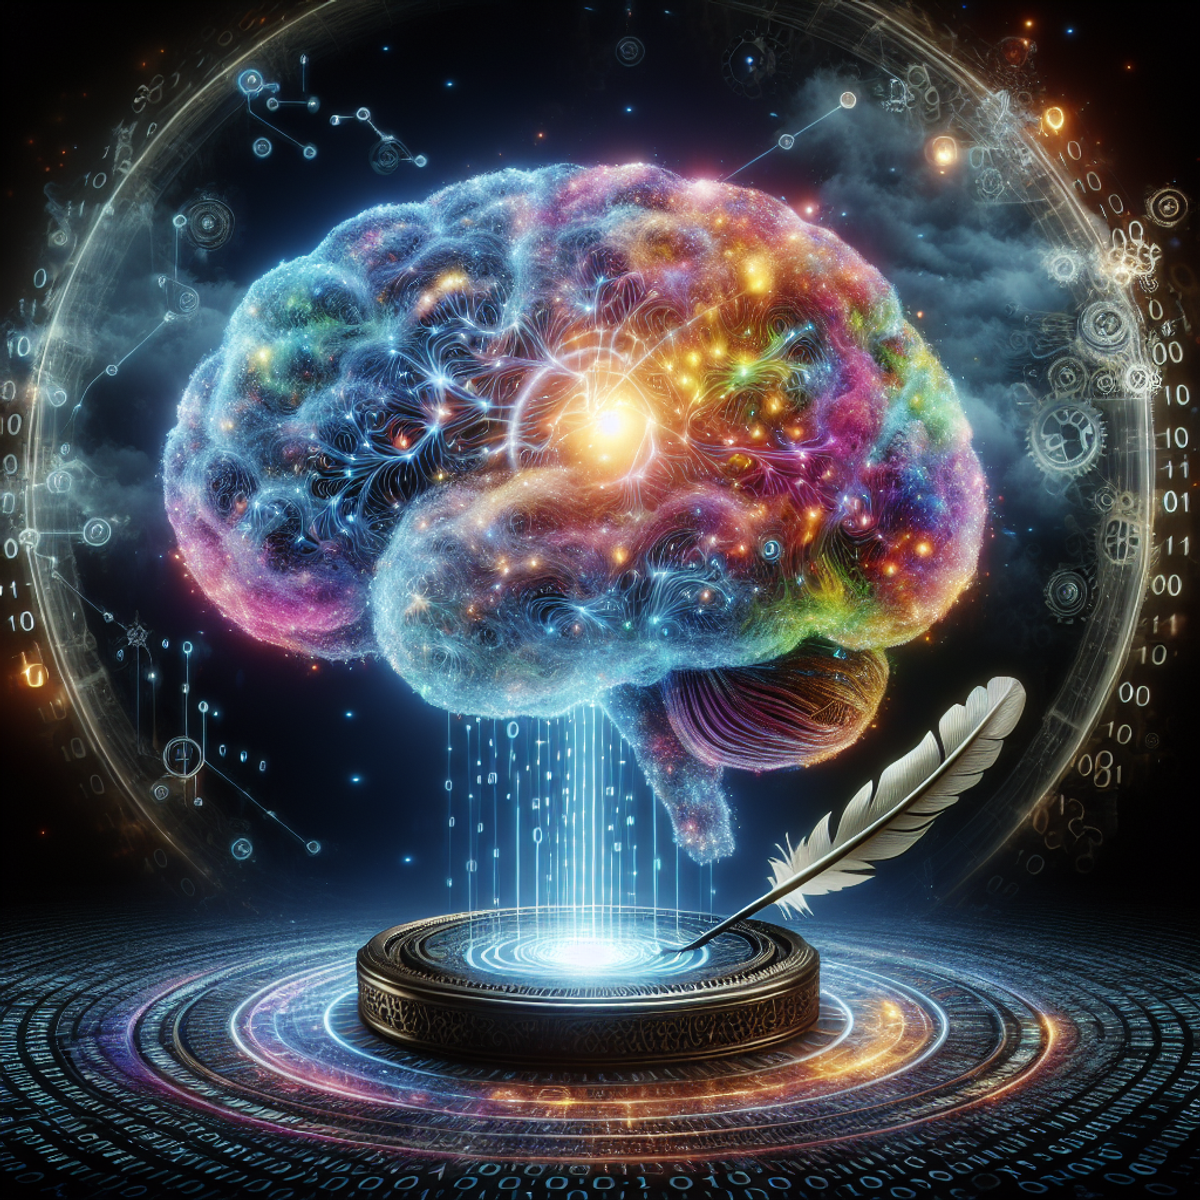 A holographic brain emitting vibrant colors, surrounded by binary codes, an antique quill, and spinning gears.